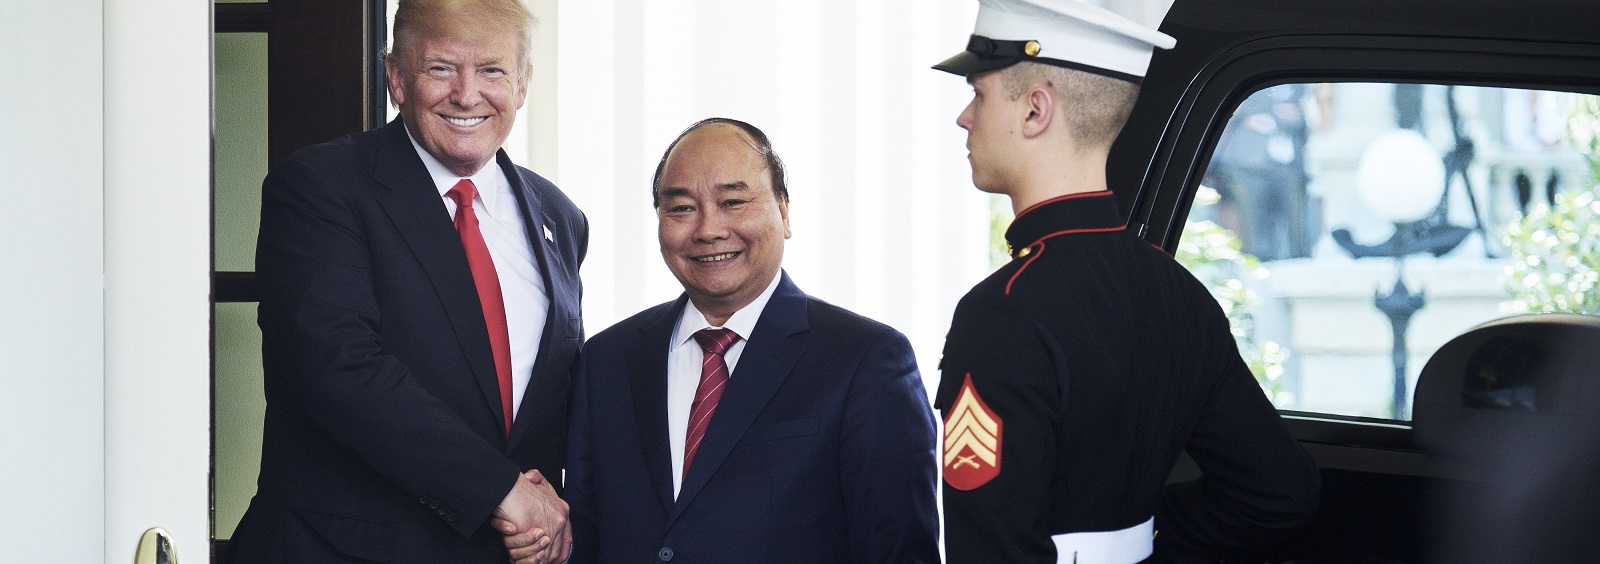  US President Donald Trump with Vietnam's Prime Minister Nguyen Xuan Phuc at the White House on Wednesday. (Photo: TJ Kirkpatrick/Getty)